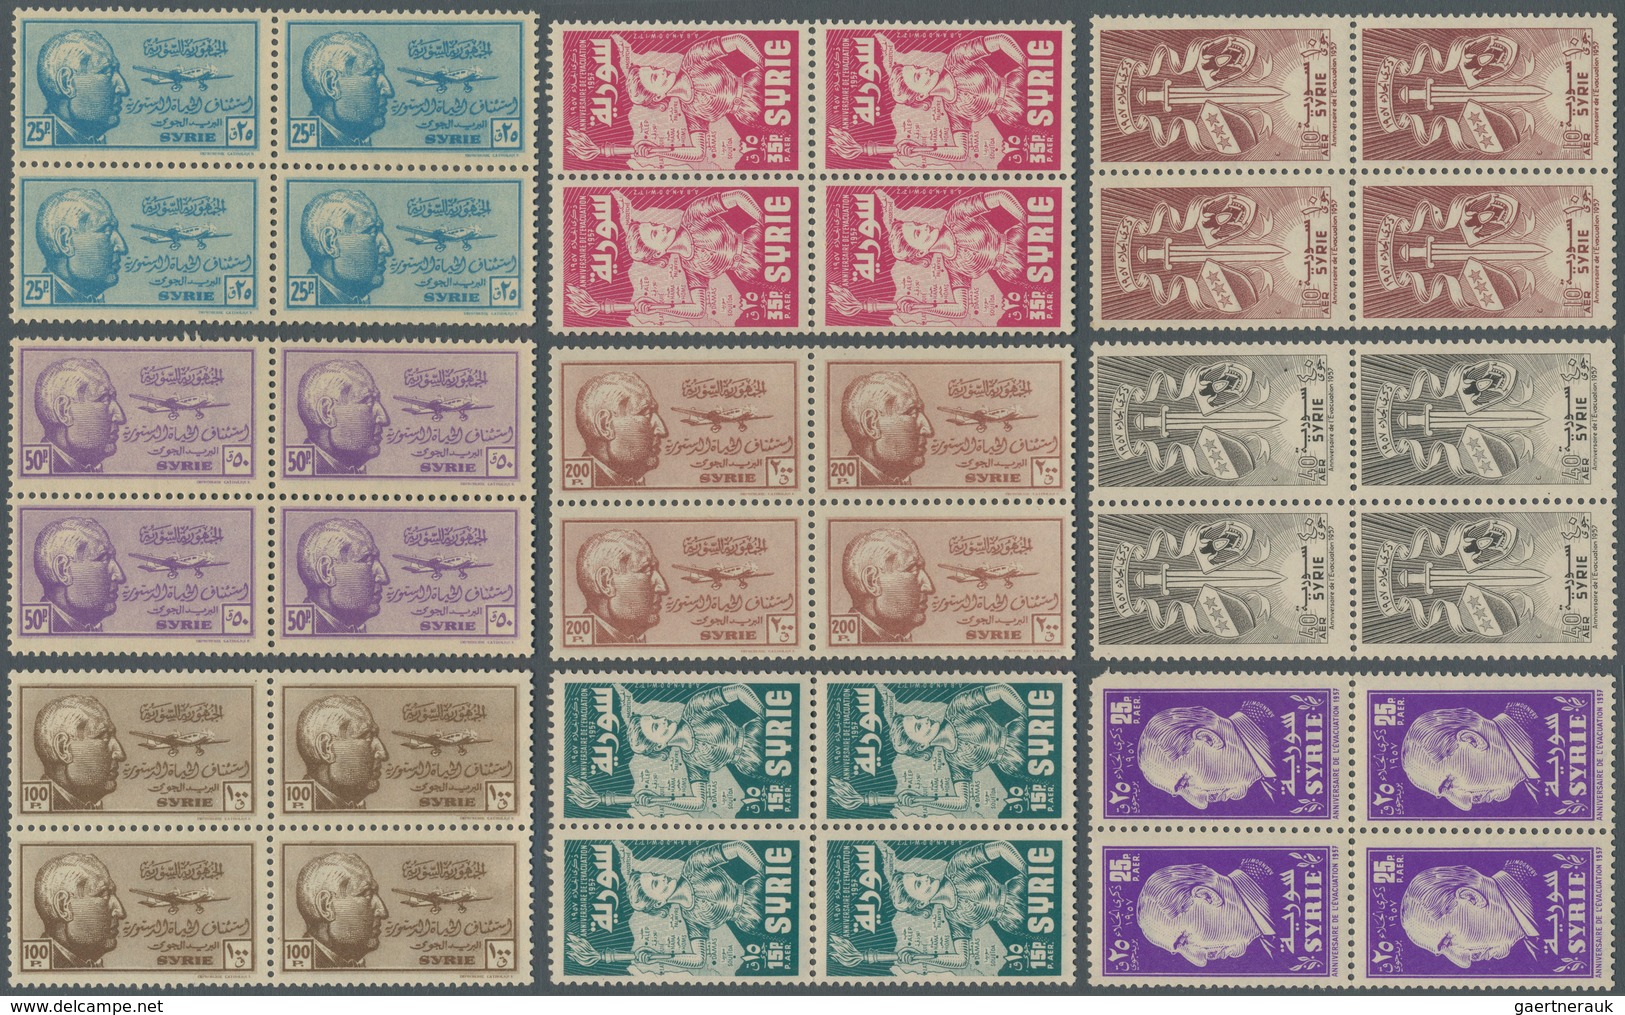 Syrien: Great Stock Of Imperf Sheetlets In Lindner Album, Many Sets Of Fourties And Fifties Includin - Syrien